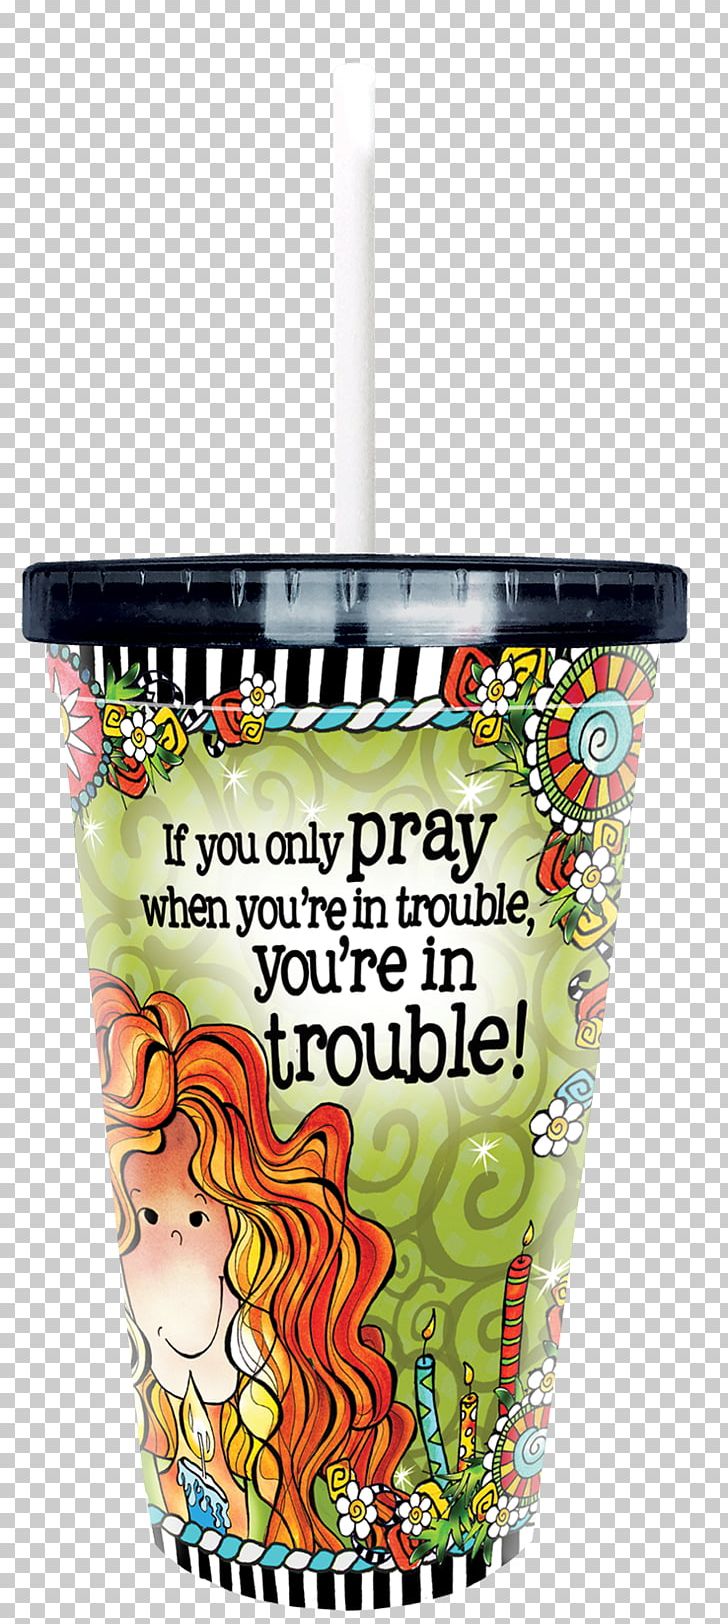 Enesco Suzy Toronto Pray/You're In Trouble Mug PNG, Clipart,  Free PNG Download